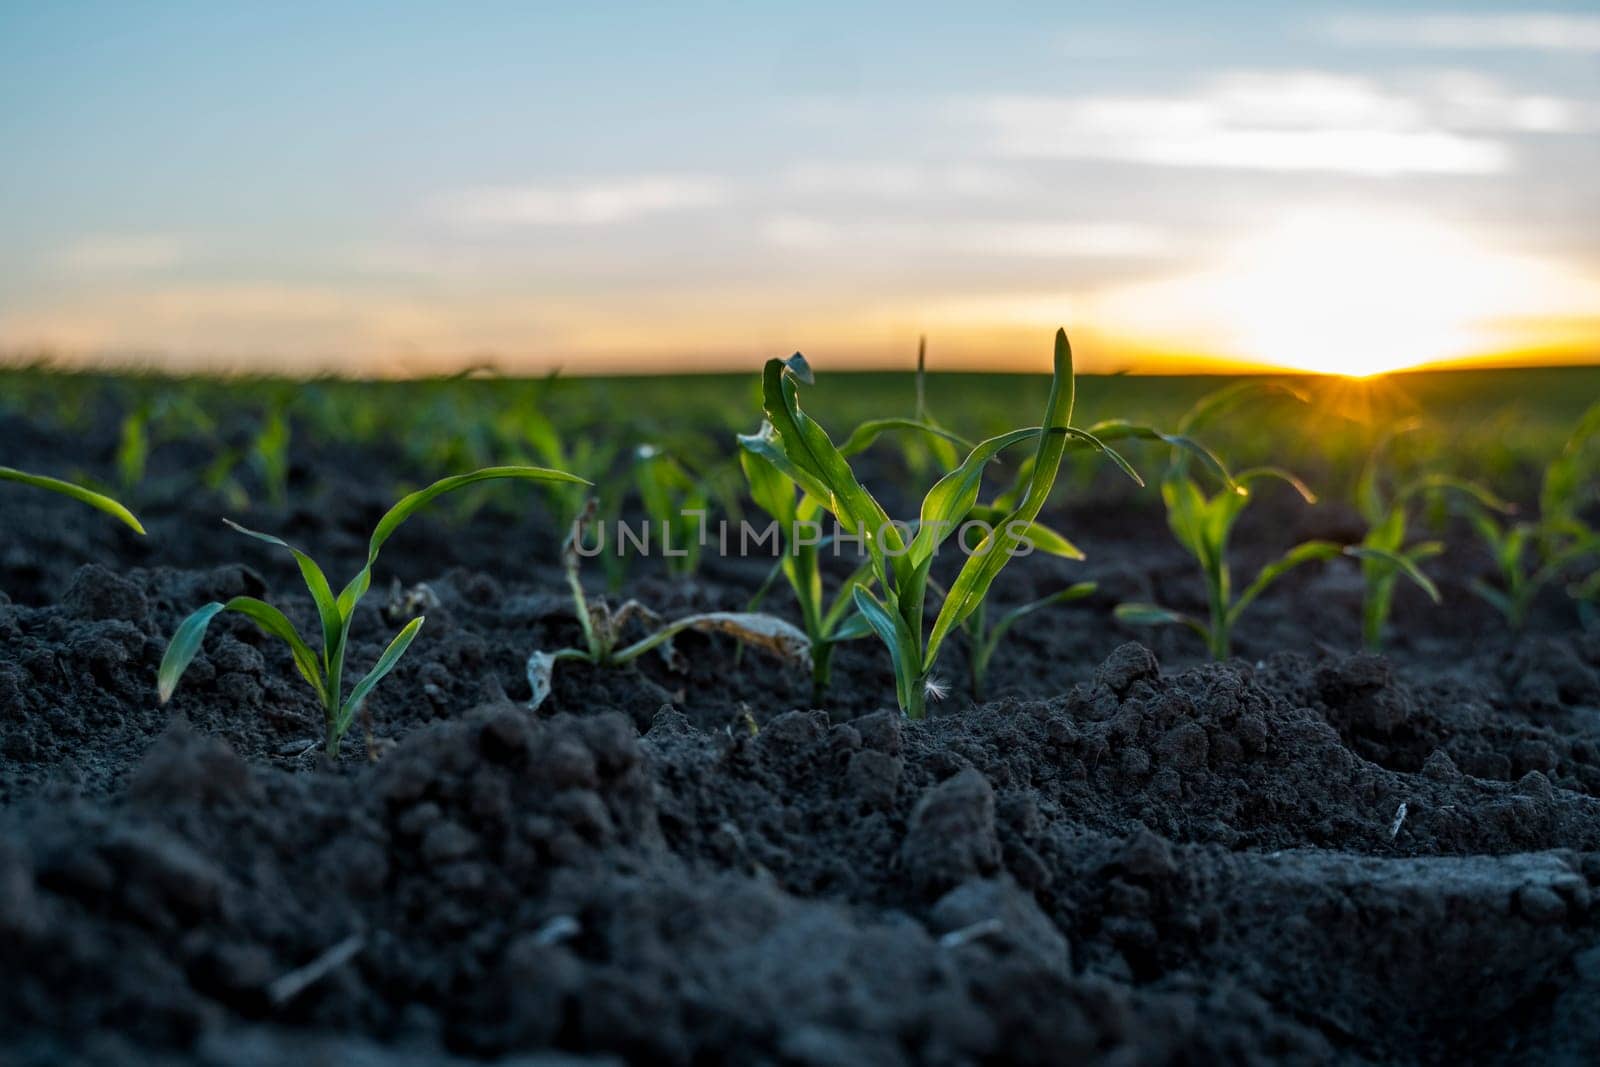 Maize seedling close up. Fertile soil. Farm and field of grain crops. Agriculture. Rural scene with a field of young corn